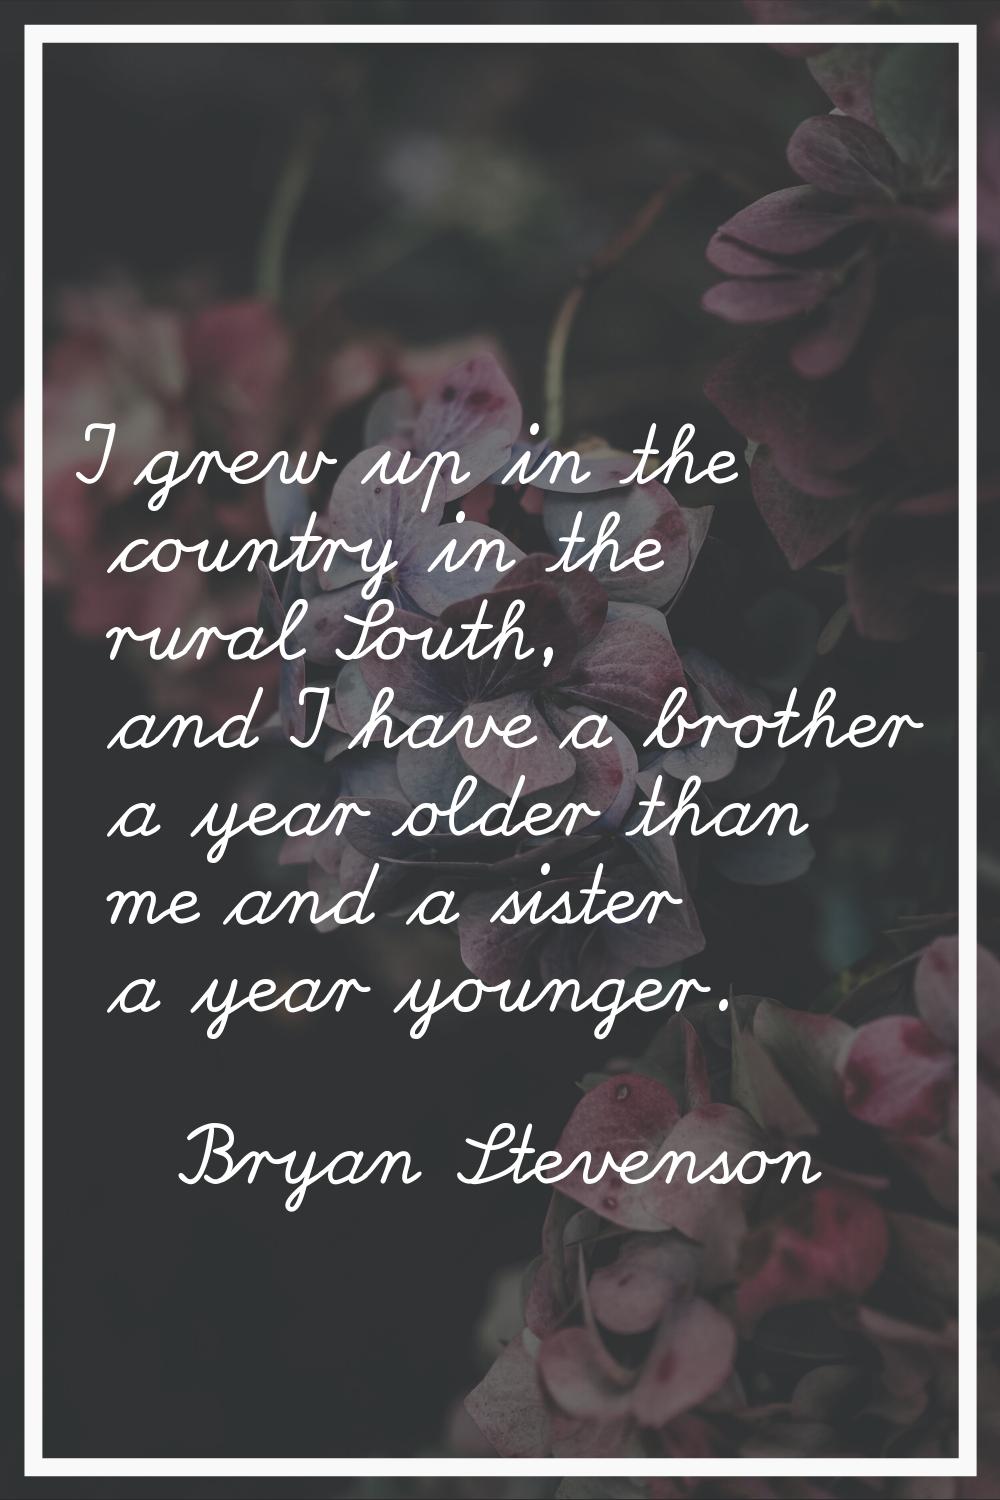 I grew up in the country in the rural South, and I have a brother a year older than me and a sister